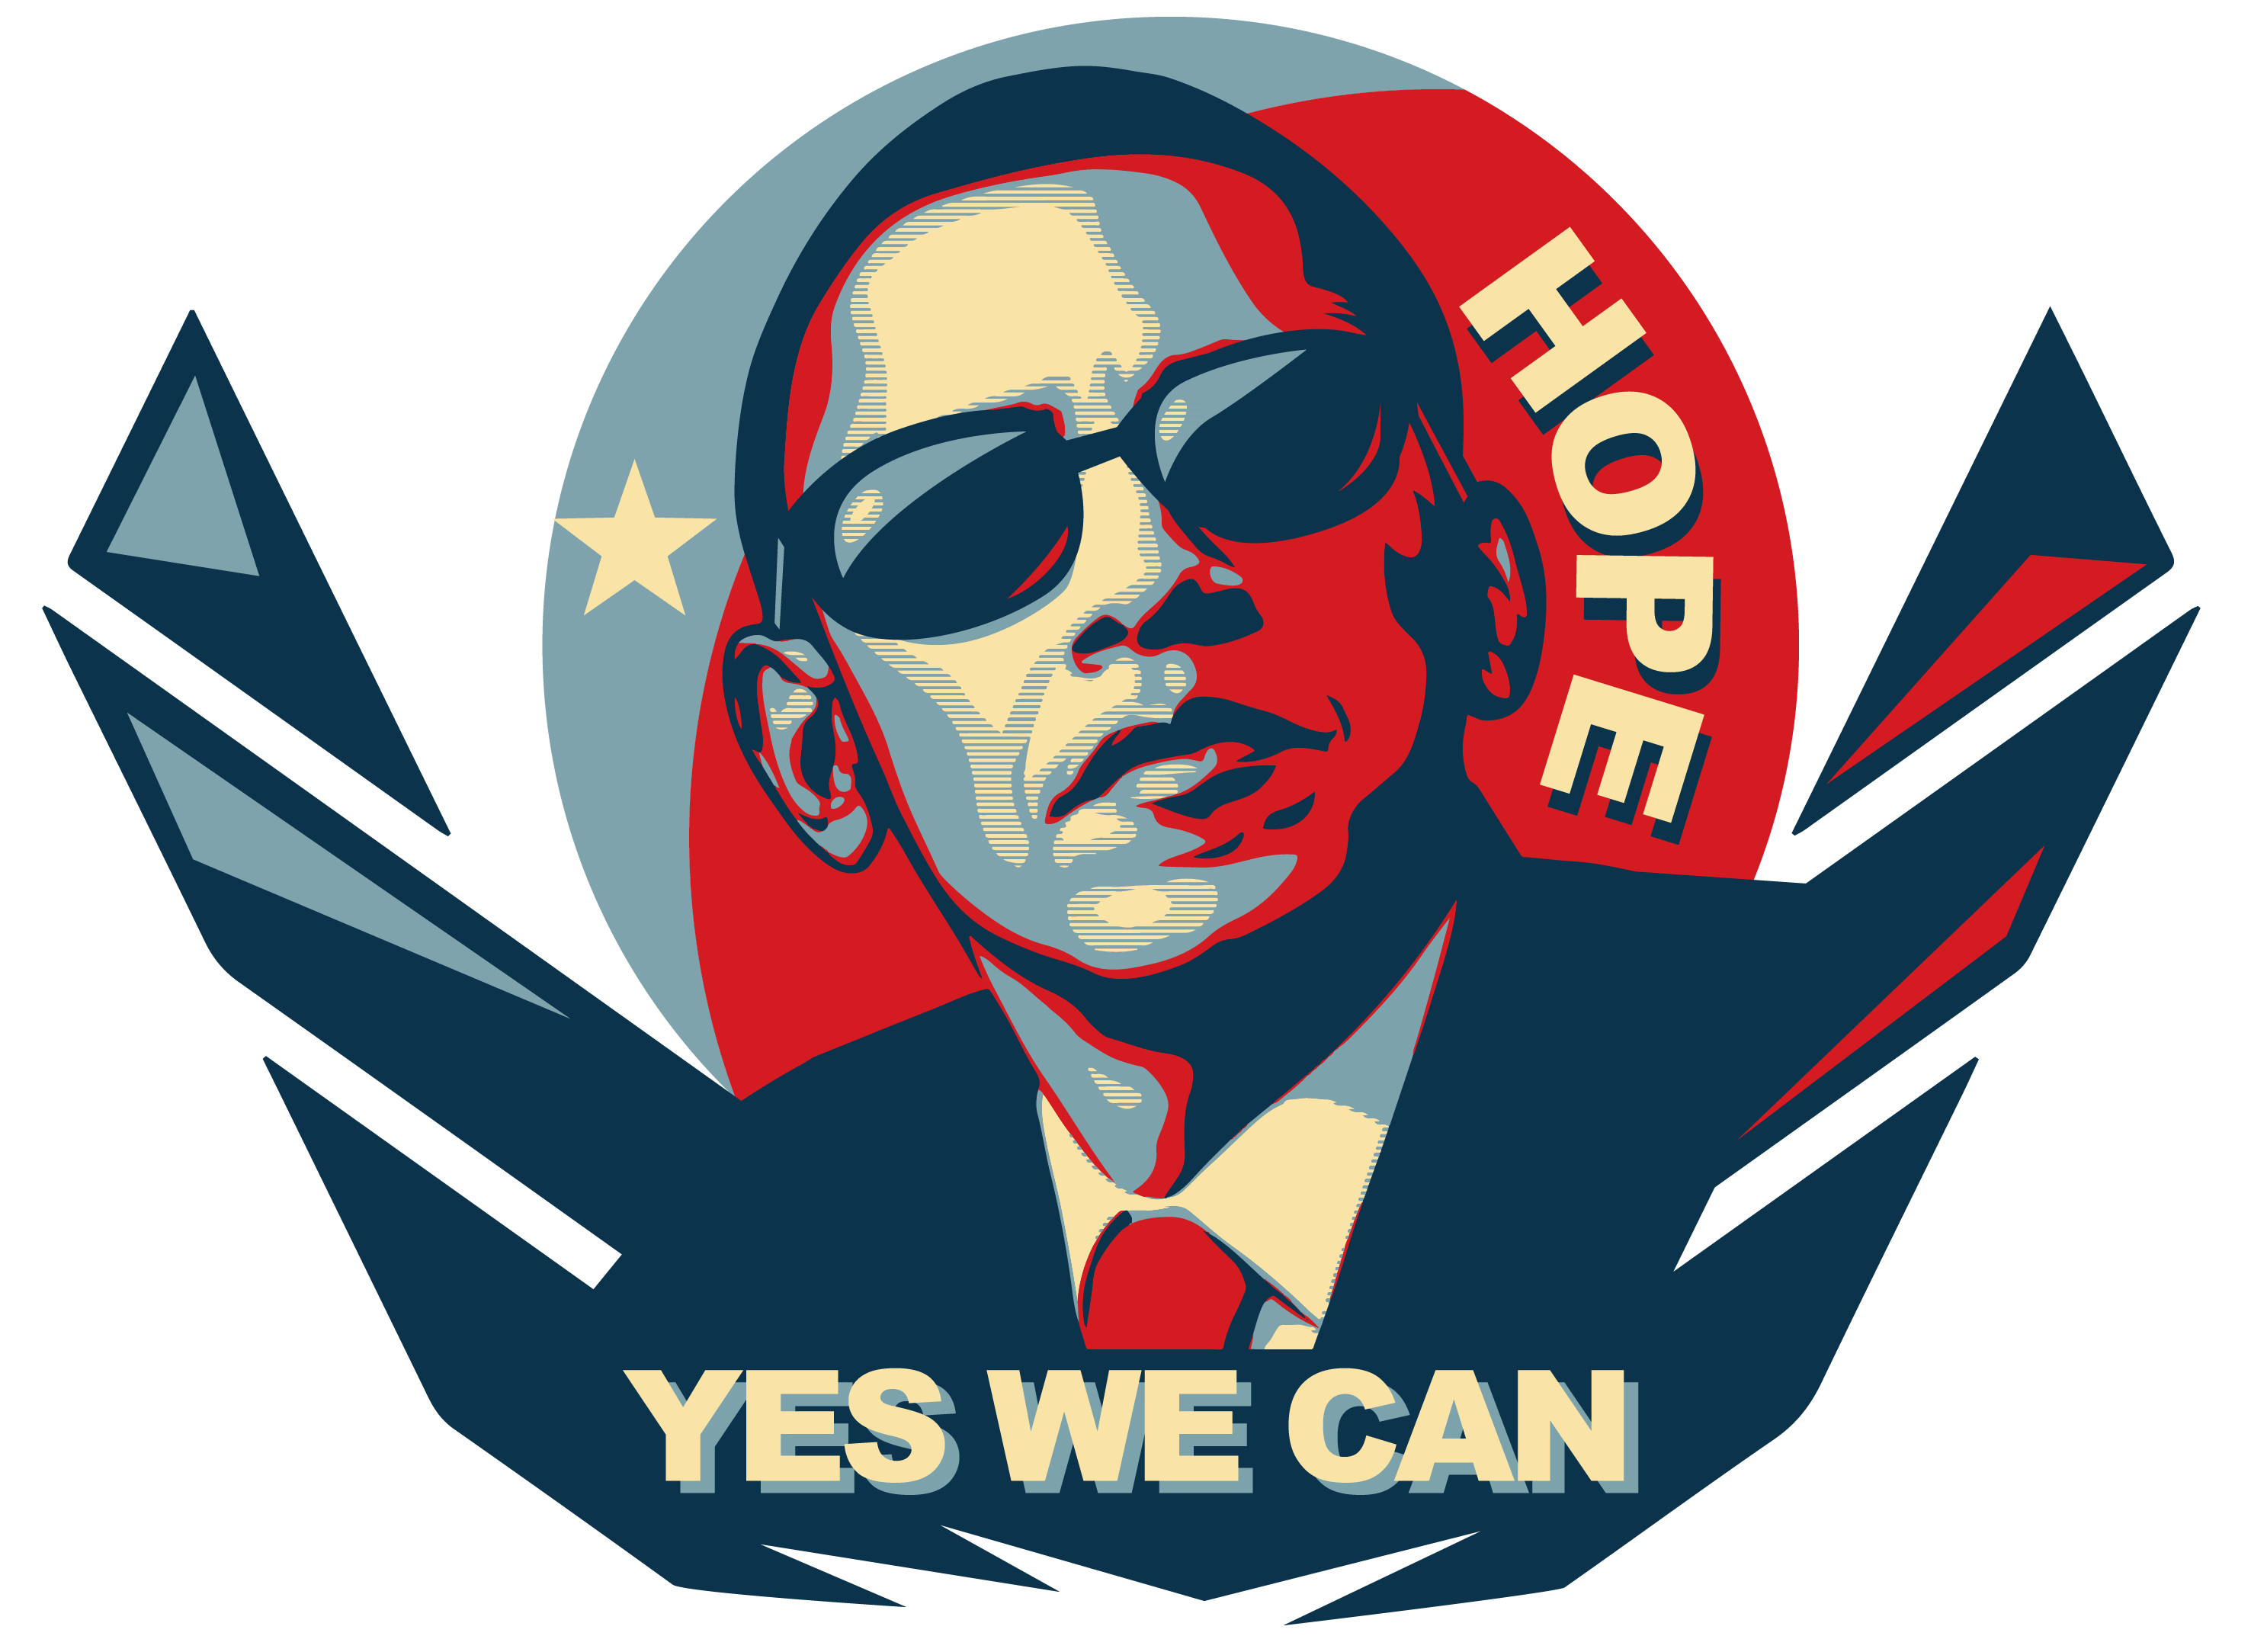 Обама we can. Yes we can Obama. Барак Обама Yes we can. Yes we can плакат.